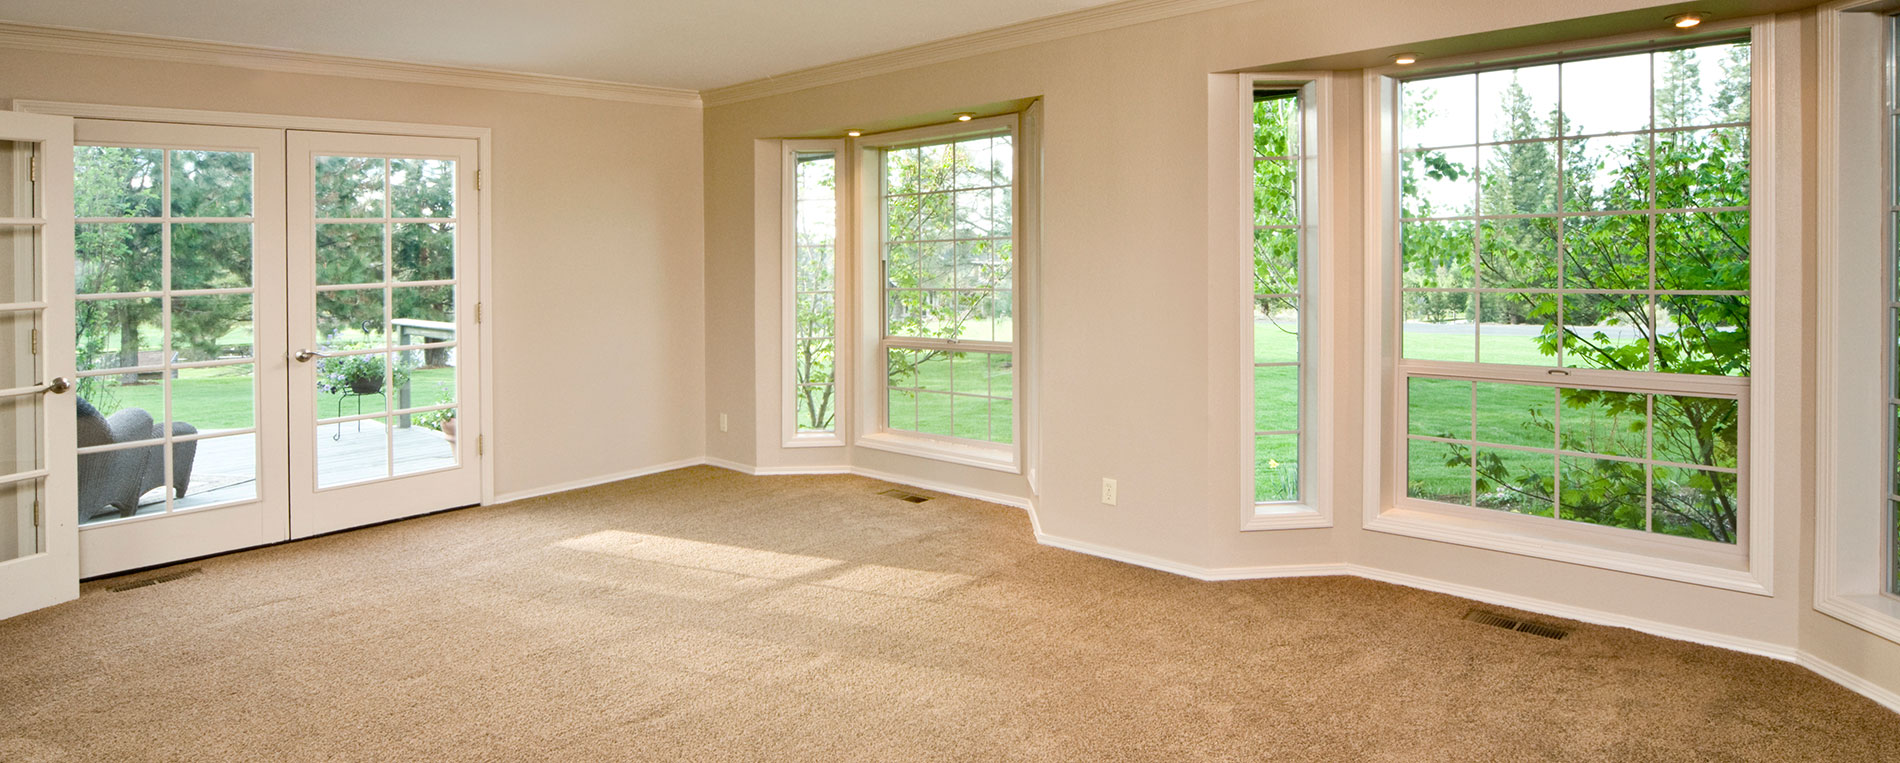 Choosing Best Possible Carpet For House